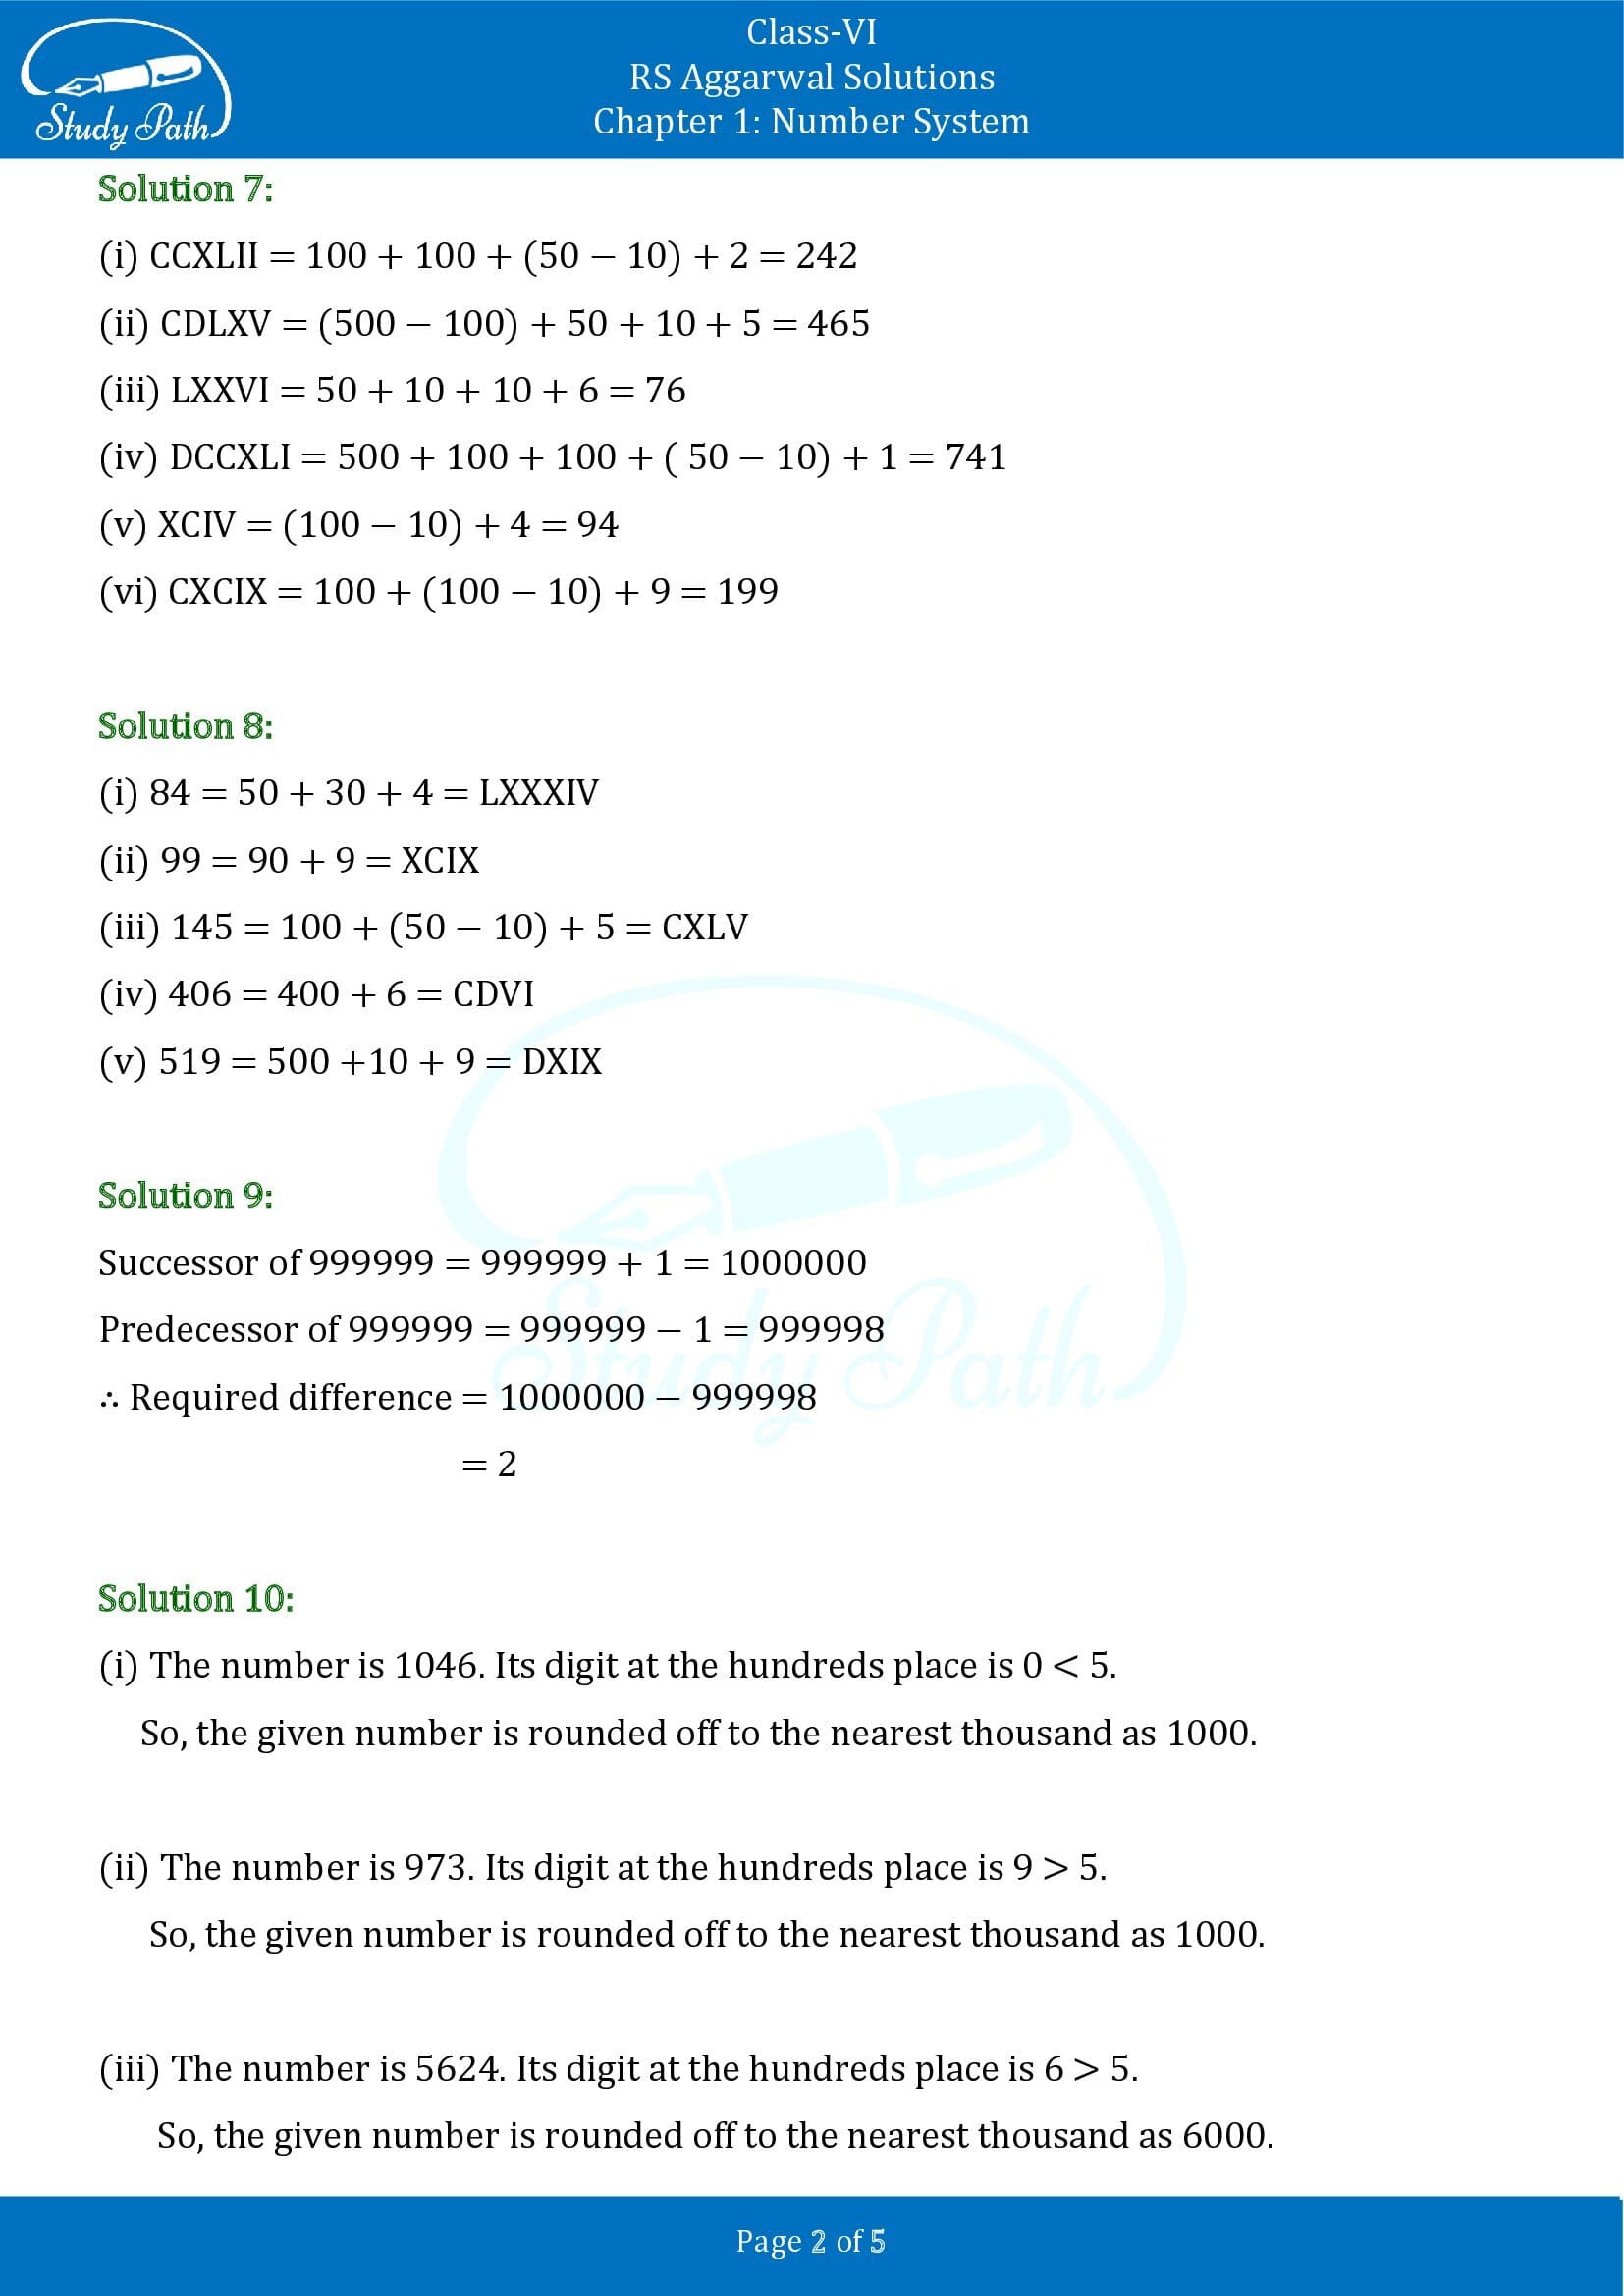 RS Aggarwal Solutions Class 6 Chapter 1 Number System Test Paper 00002